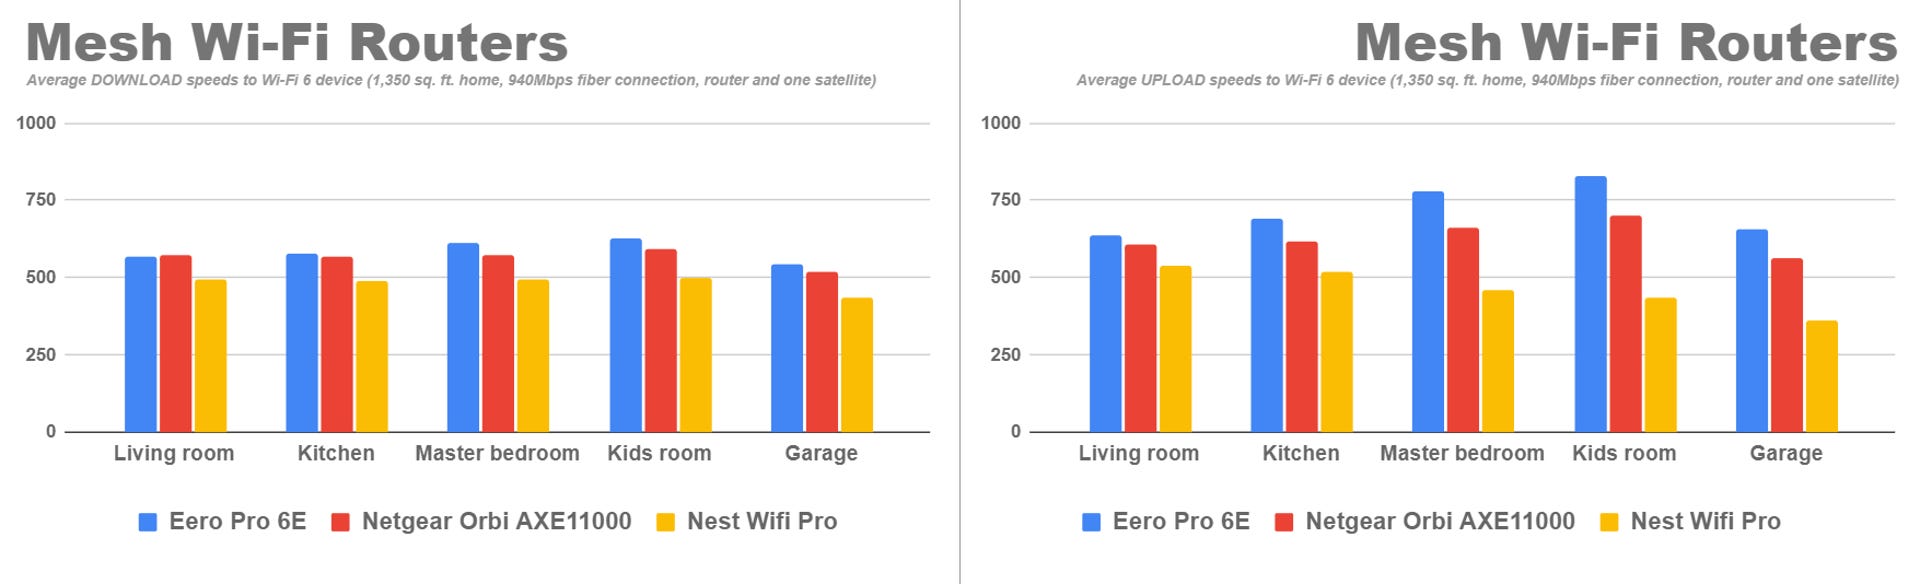 A bar graph showing the average room-by-room upload and download speeds from the Eero Pro 6E, Netgear Orbi AXE11000, and Nest Wifi Pro mesh routers to a Wi-Fi 6 test device on a gigabit network. On average, the Eero Pro 6E was the fastest in all rooms tested throughout a 1,350 sq. ft. test space, with the Netgear Orbi system right behind it and the Nest Wifi Pro in third. Overall, across all rooms and distances, the Eero Pro 6E returned average upload and download speeds of 869Mbps and 673Mbps, respectively. Netgear Orbi rang in with average uploads of 704Mbps and average downloads of 587Mbps, while Nest Wifi Pro finished with average uploads of 535Mbps and average downloads of 471Mbps.